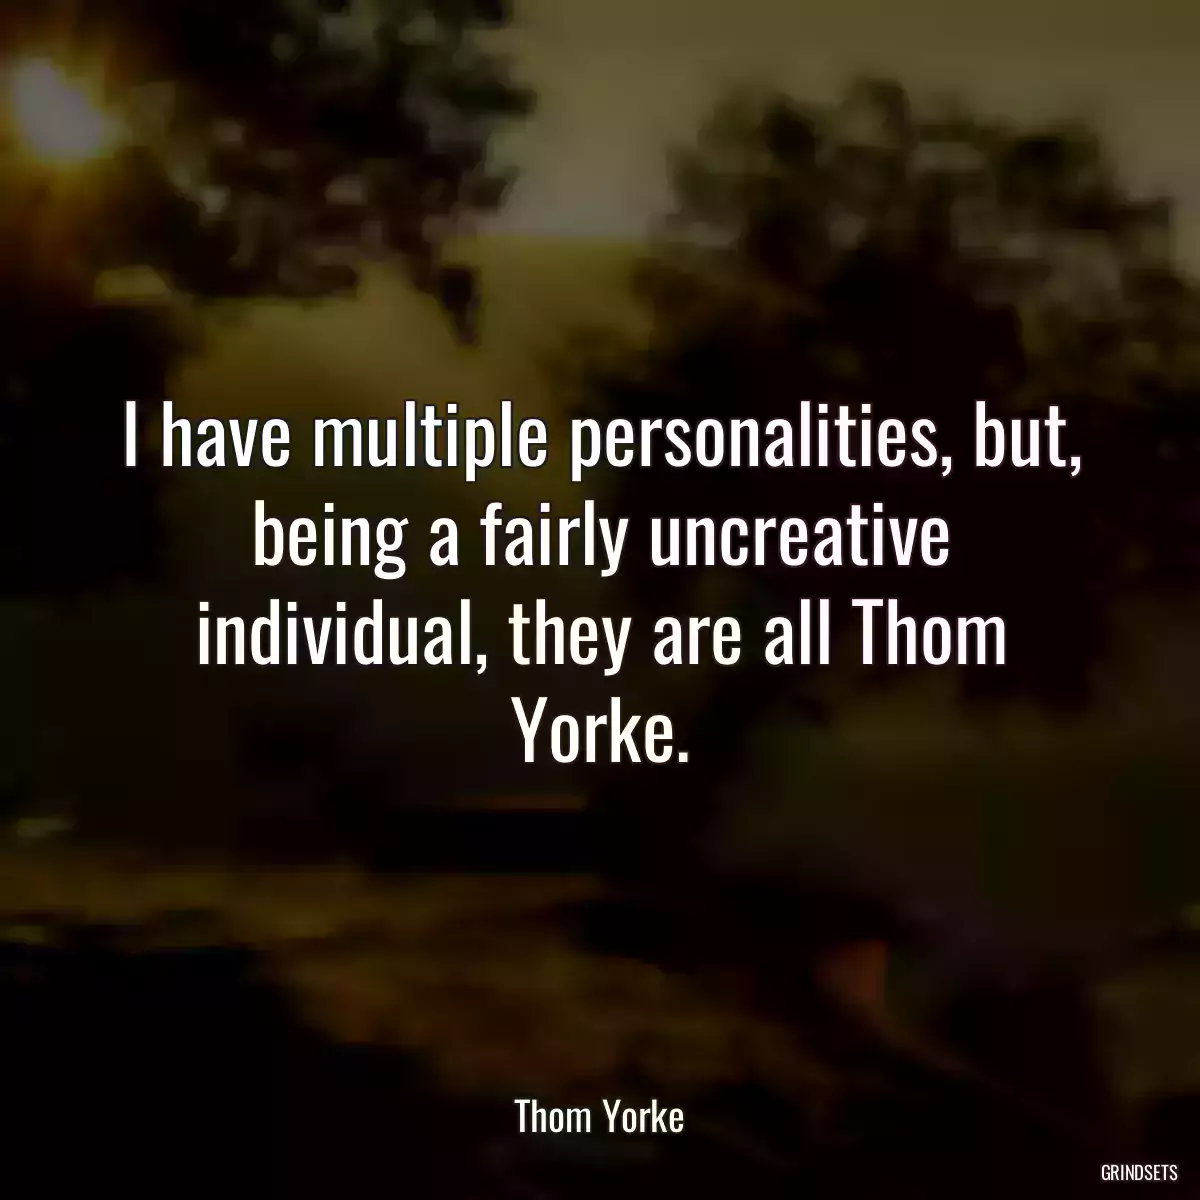 I have multiple personalities, but, being a fairly uncreative individual, they are all Thom Yorke.